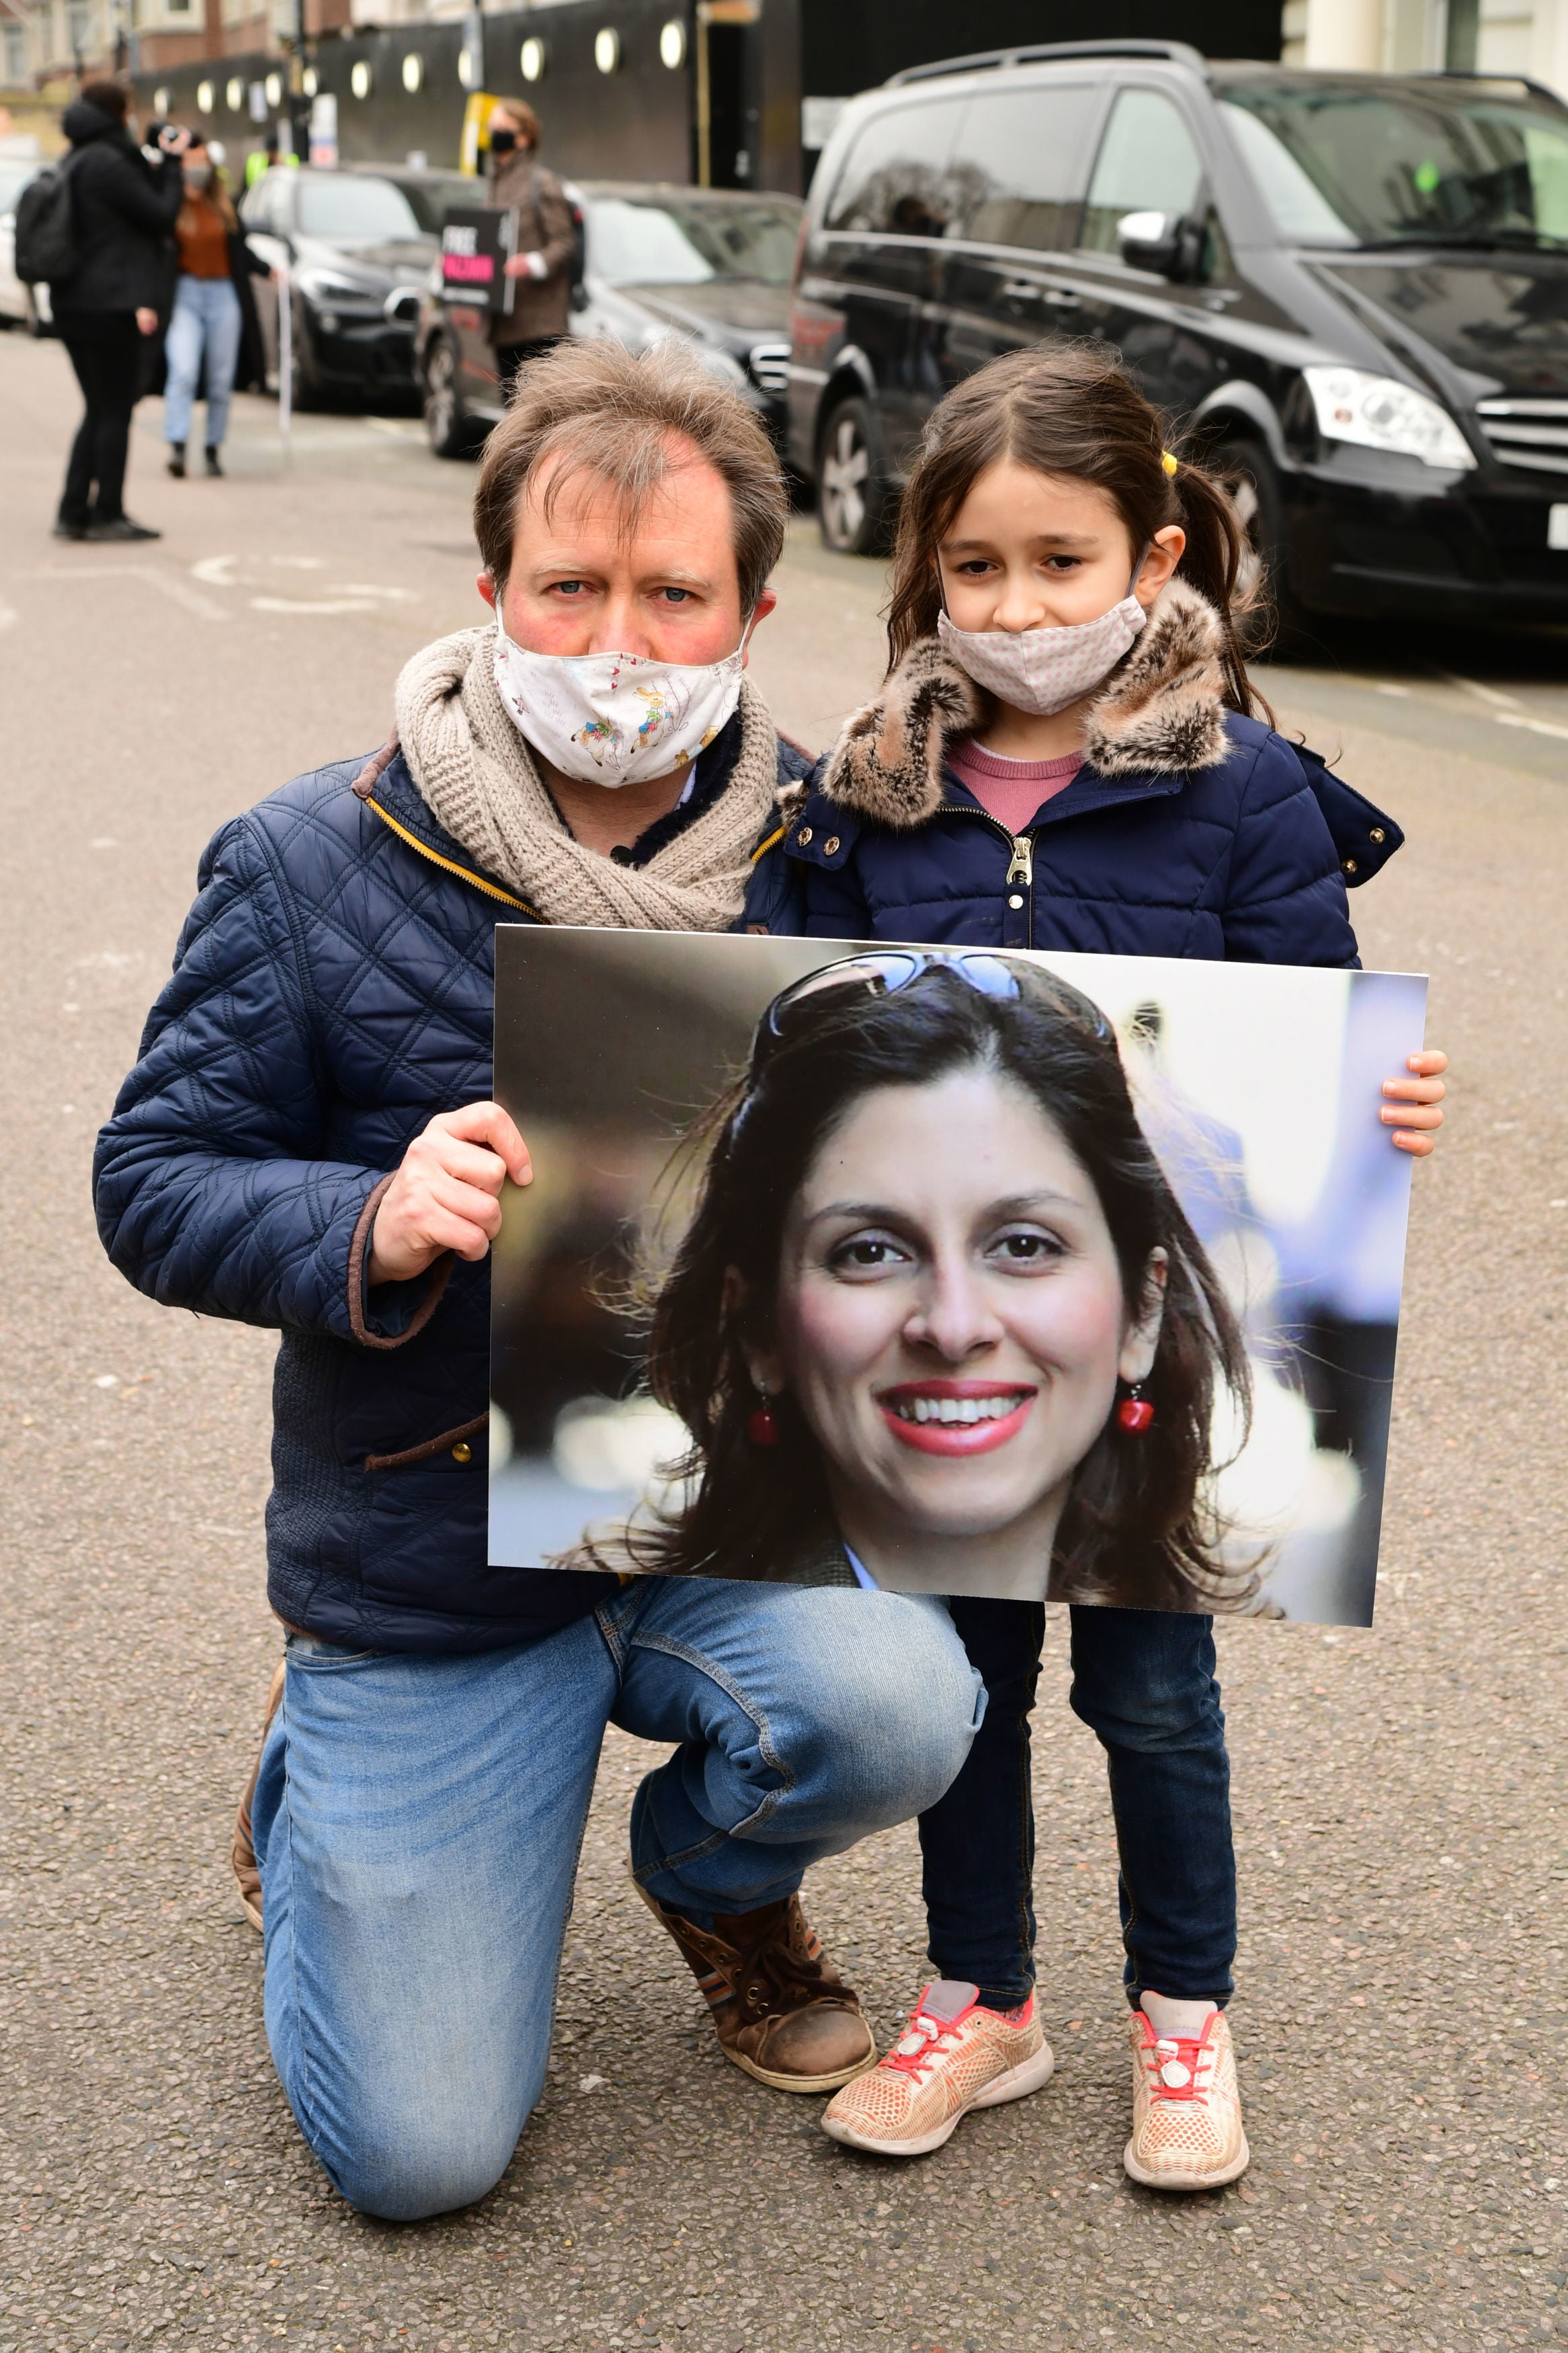 Richard Ratcliffe and his daughter Gabriella outside the Iranian Embassy in London